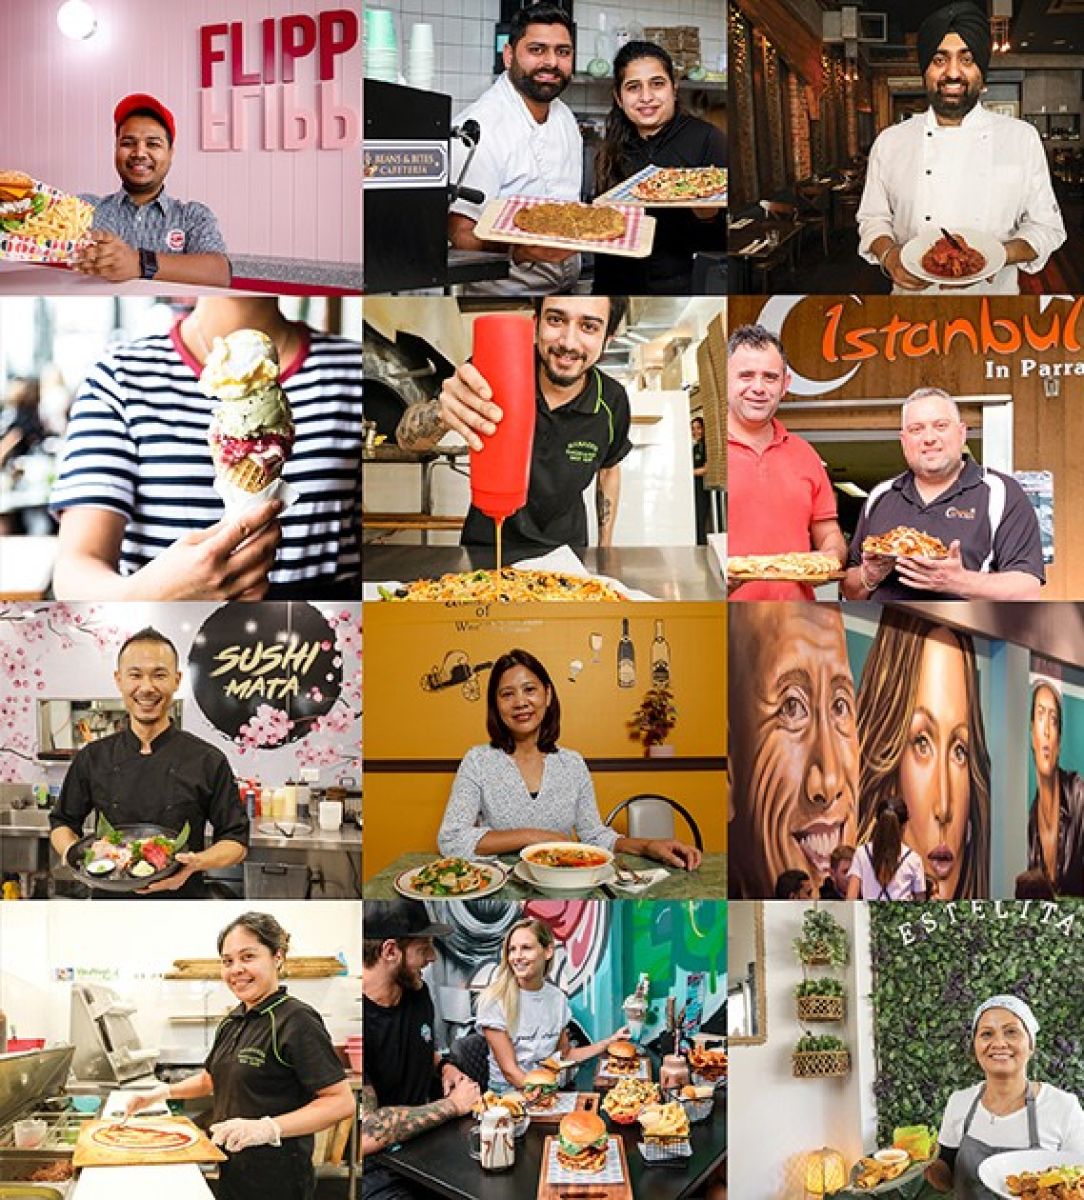 A compilation of individuals and diverse culinary experiences at Parramatta's Church Street dining and entertainment precinct.